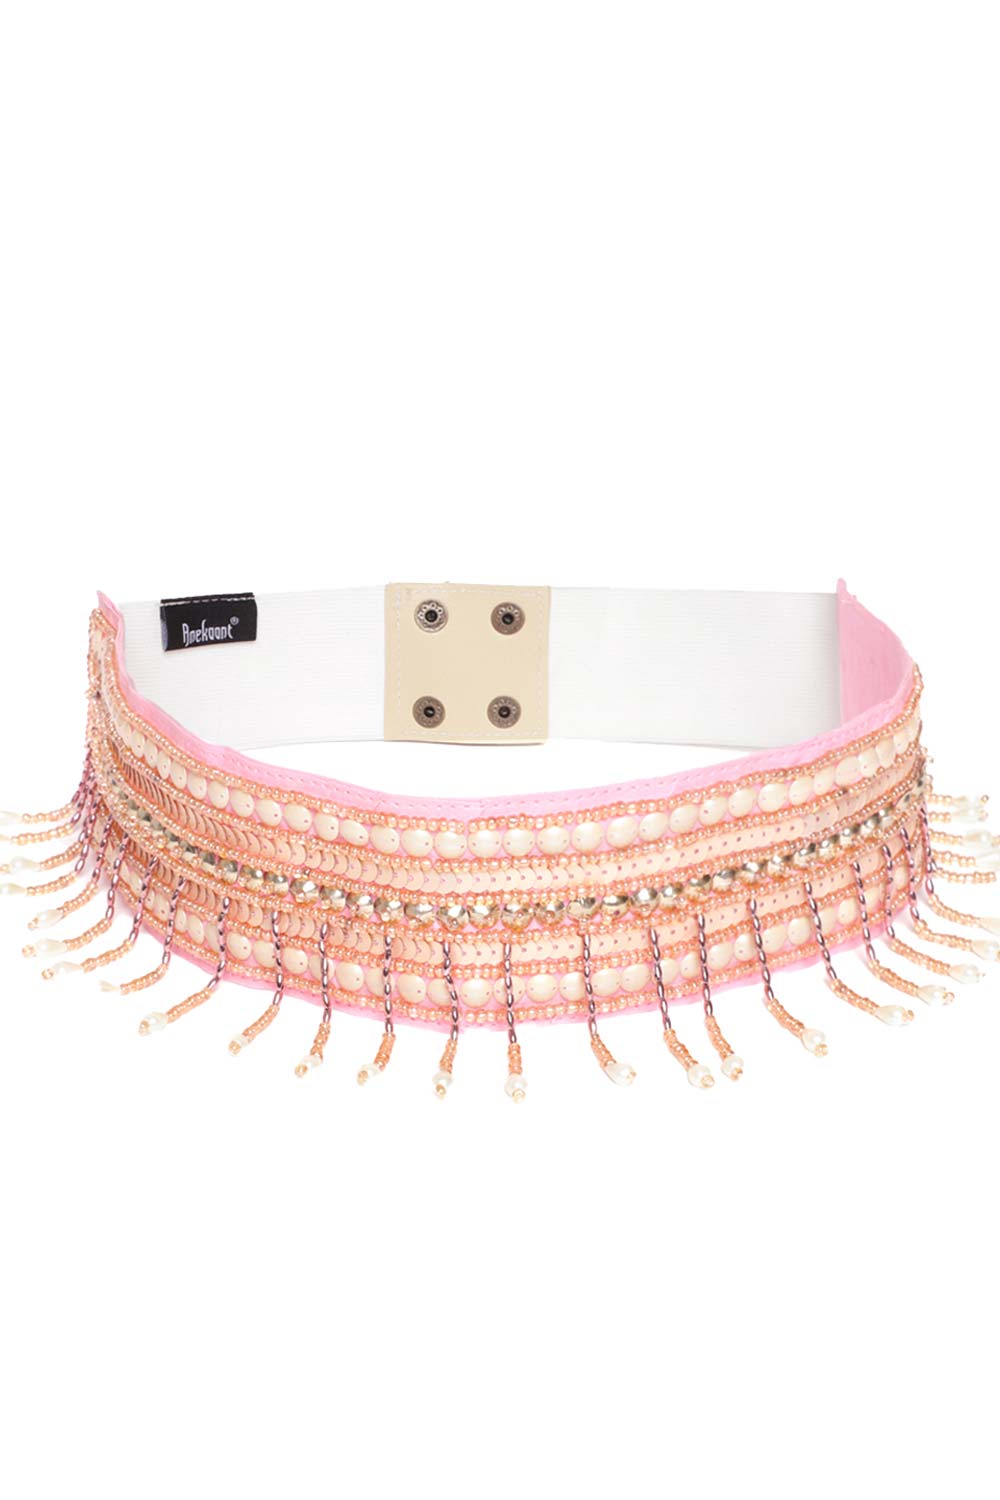 Buy Striped Bead Work Saree Belt in Baby Pink & Multi Online - One Minute Saree